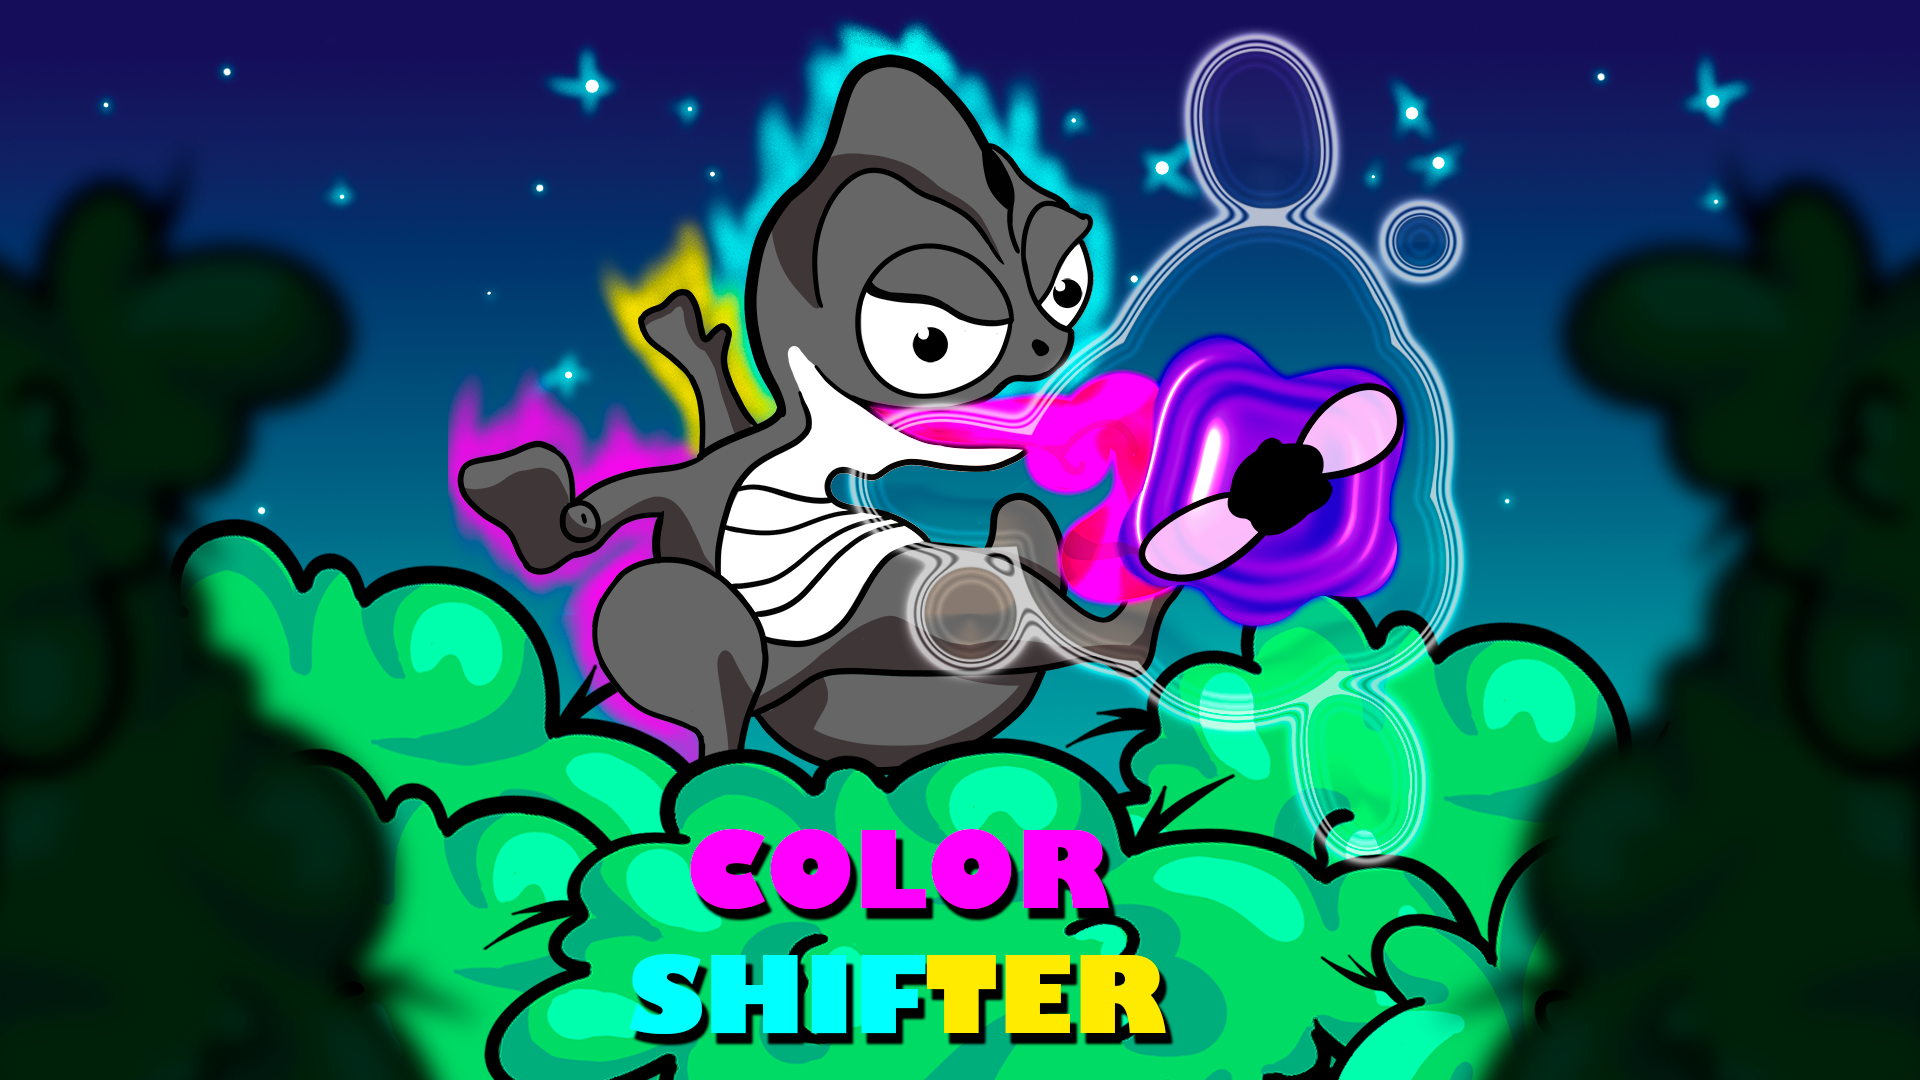 ColorShifter